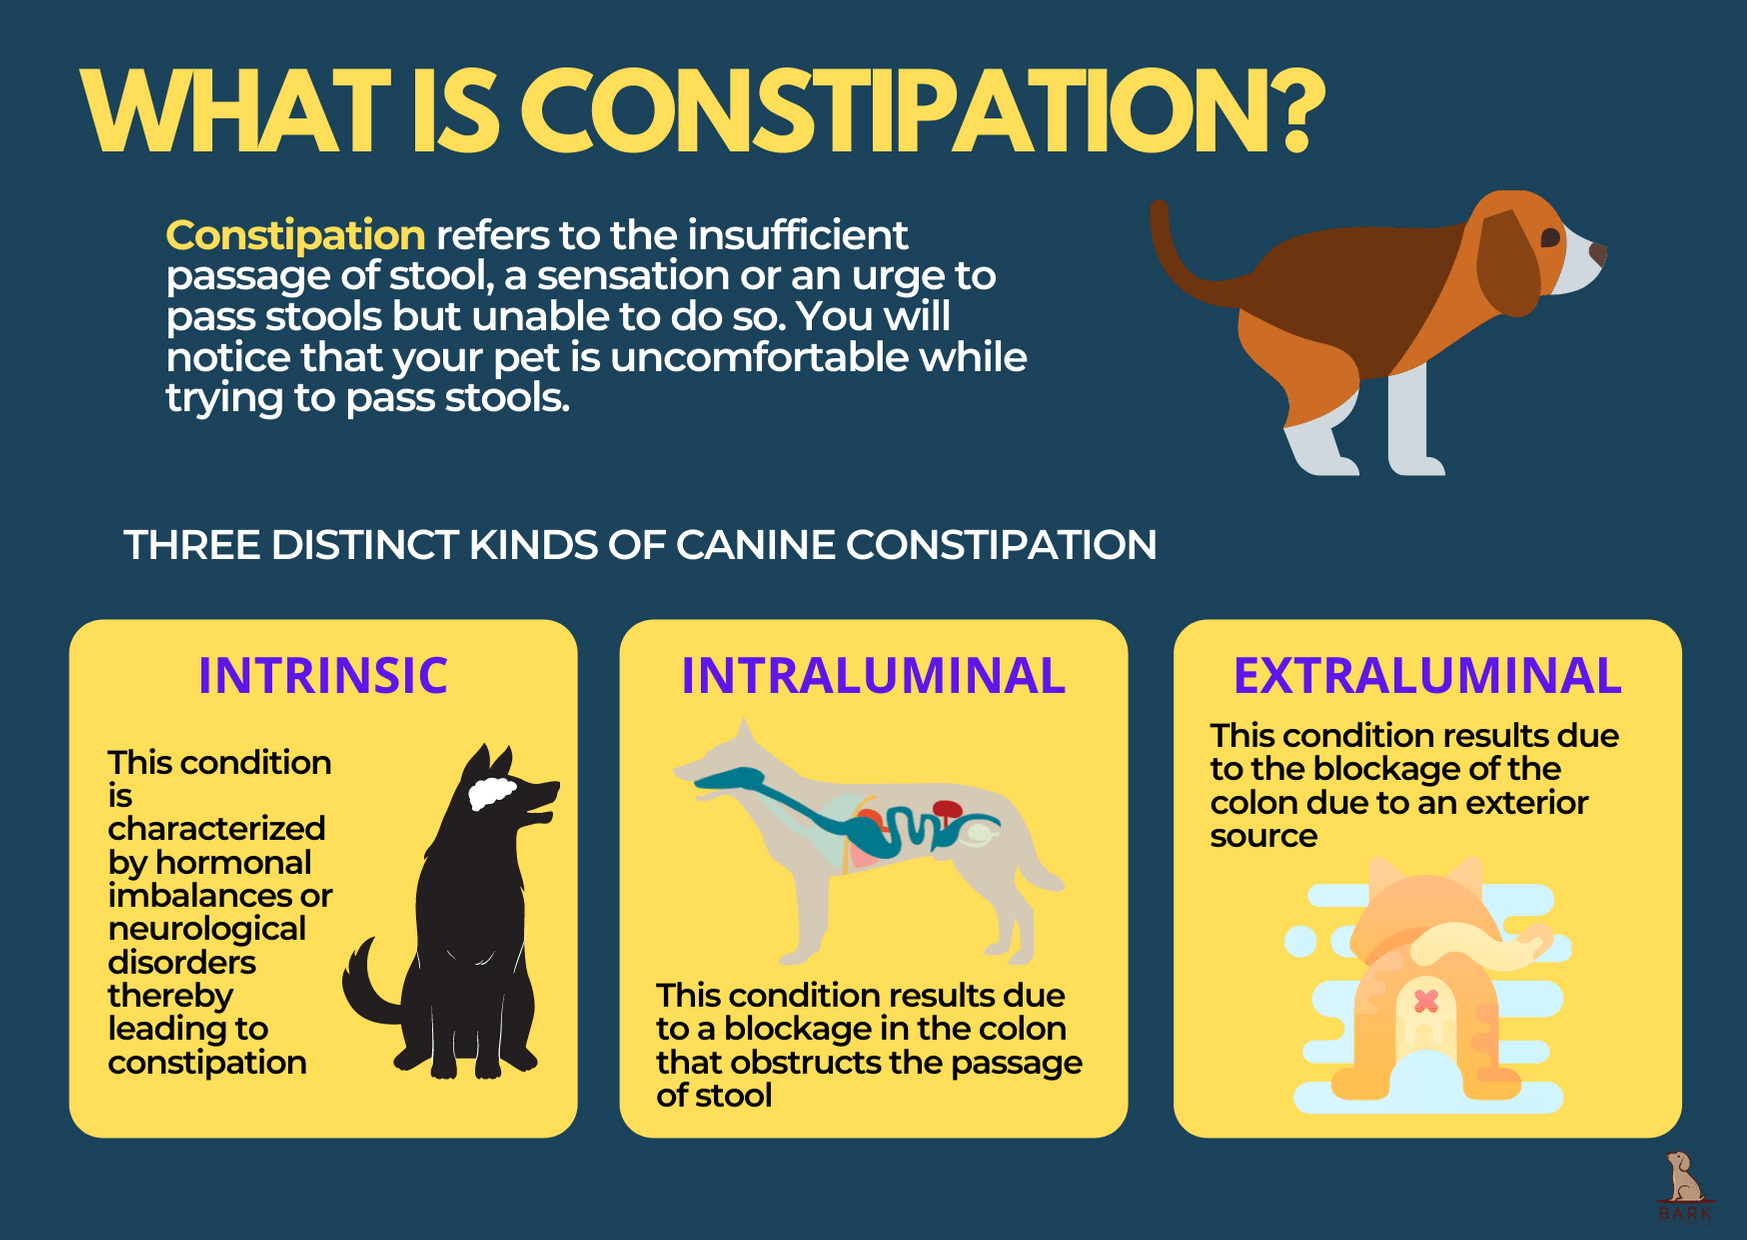 What is constipation?